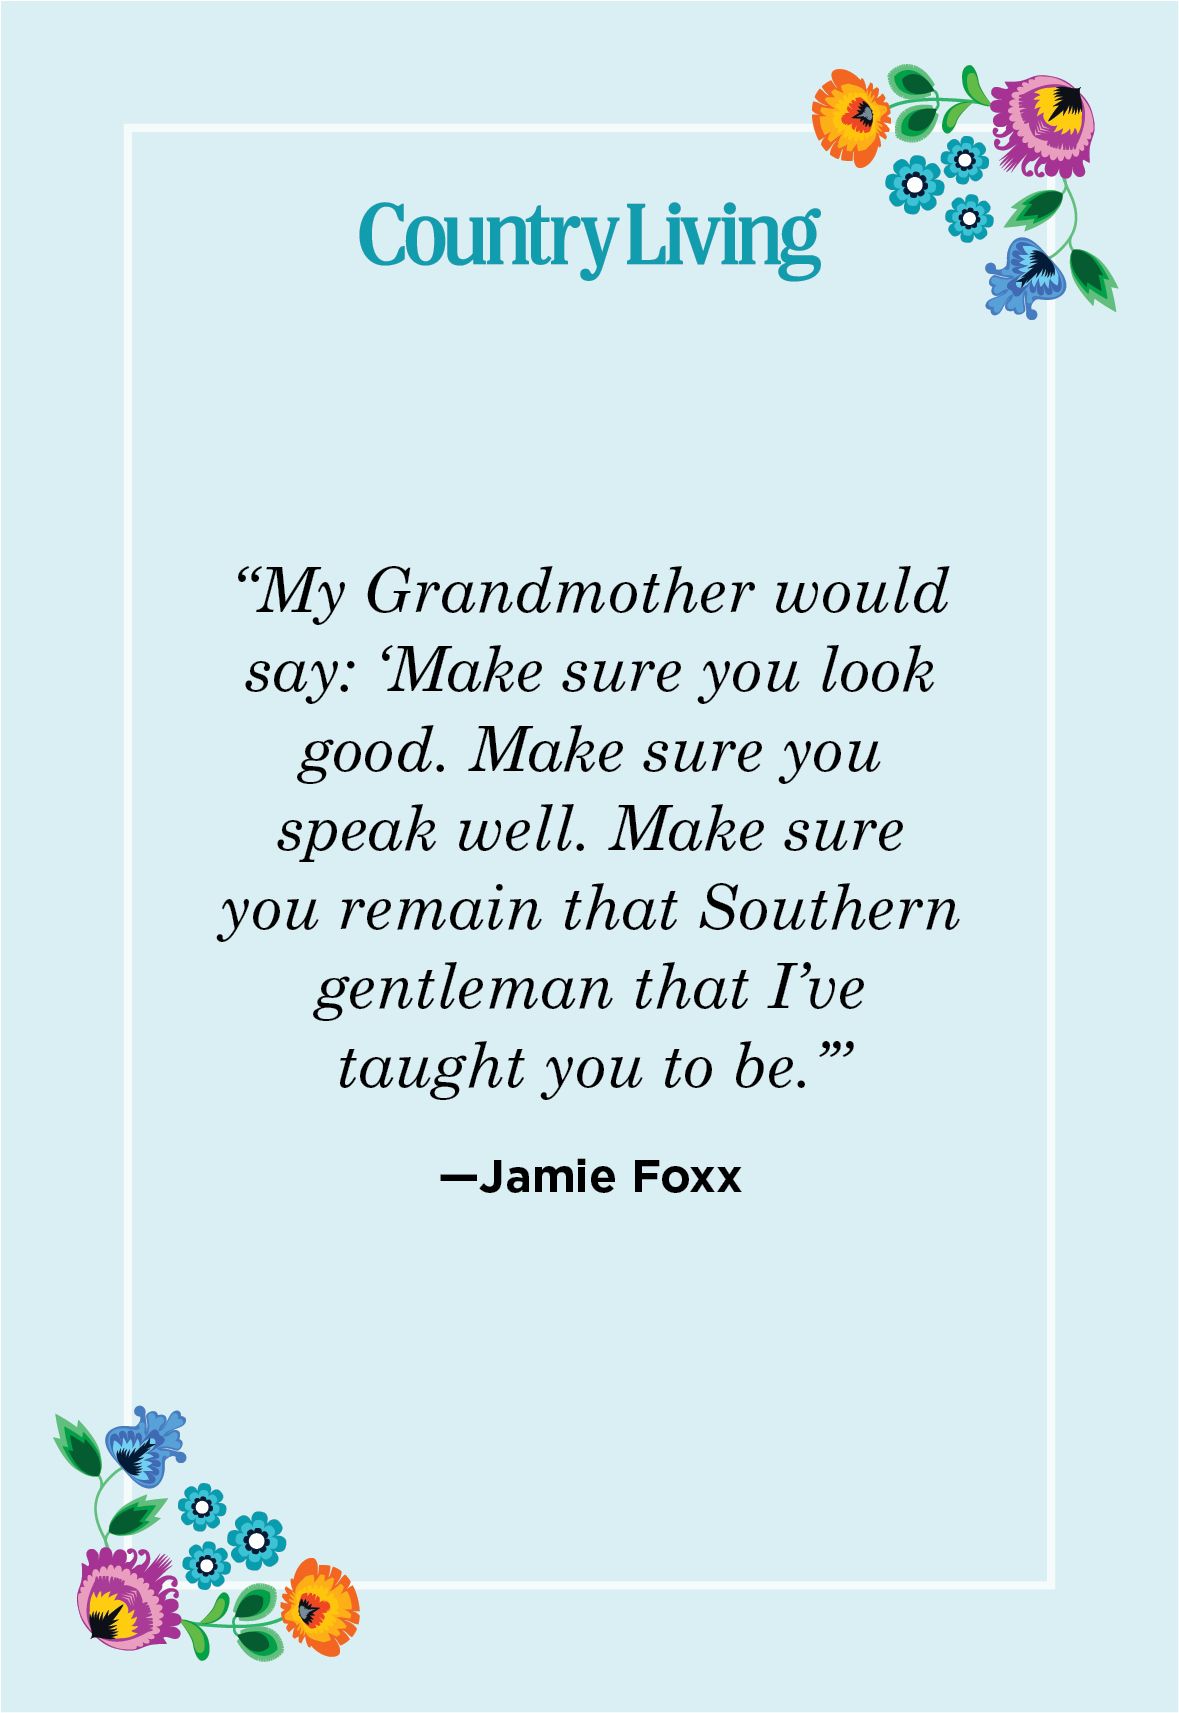 grandchildren quotes and sayings